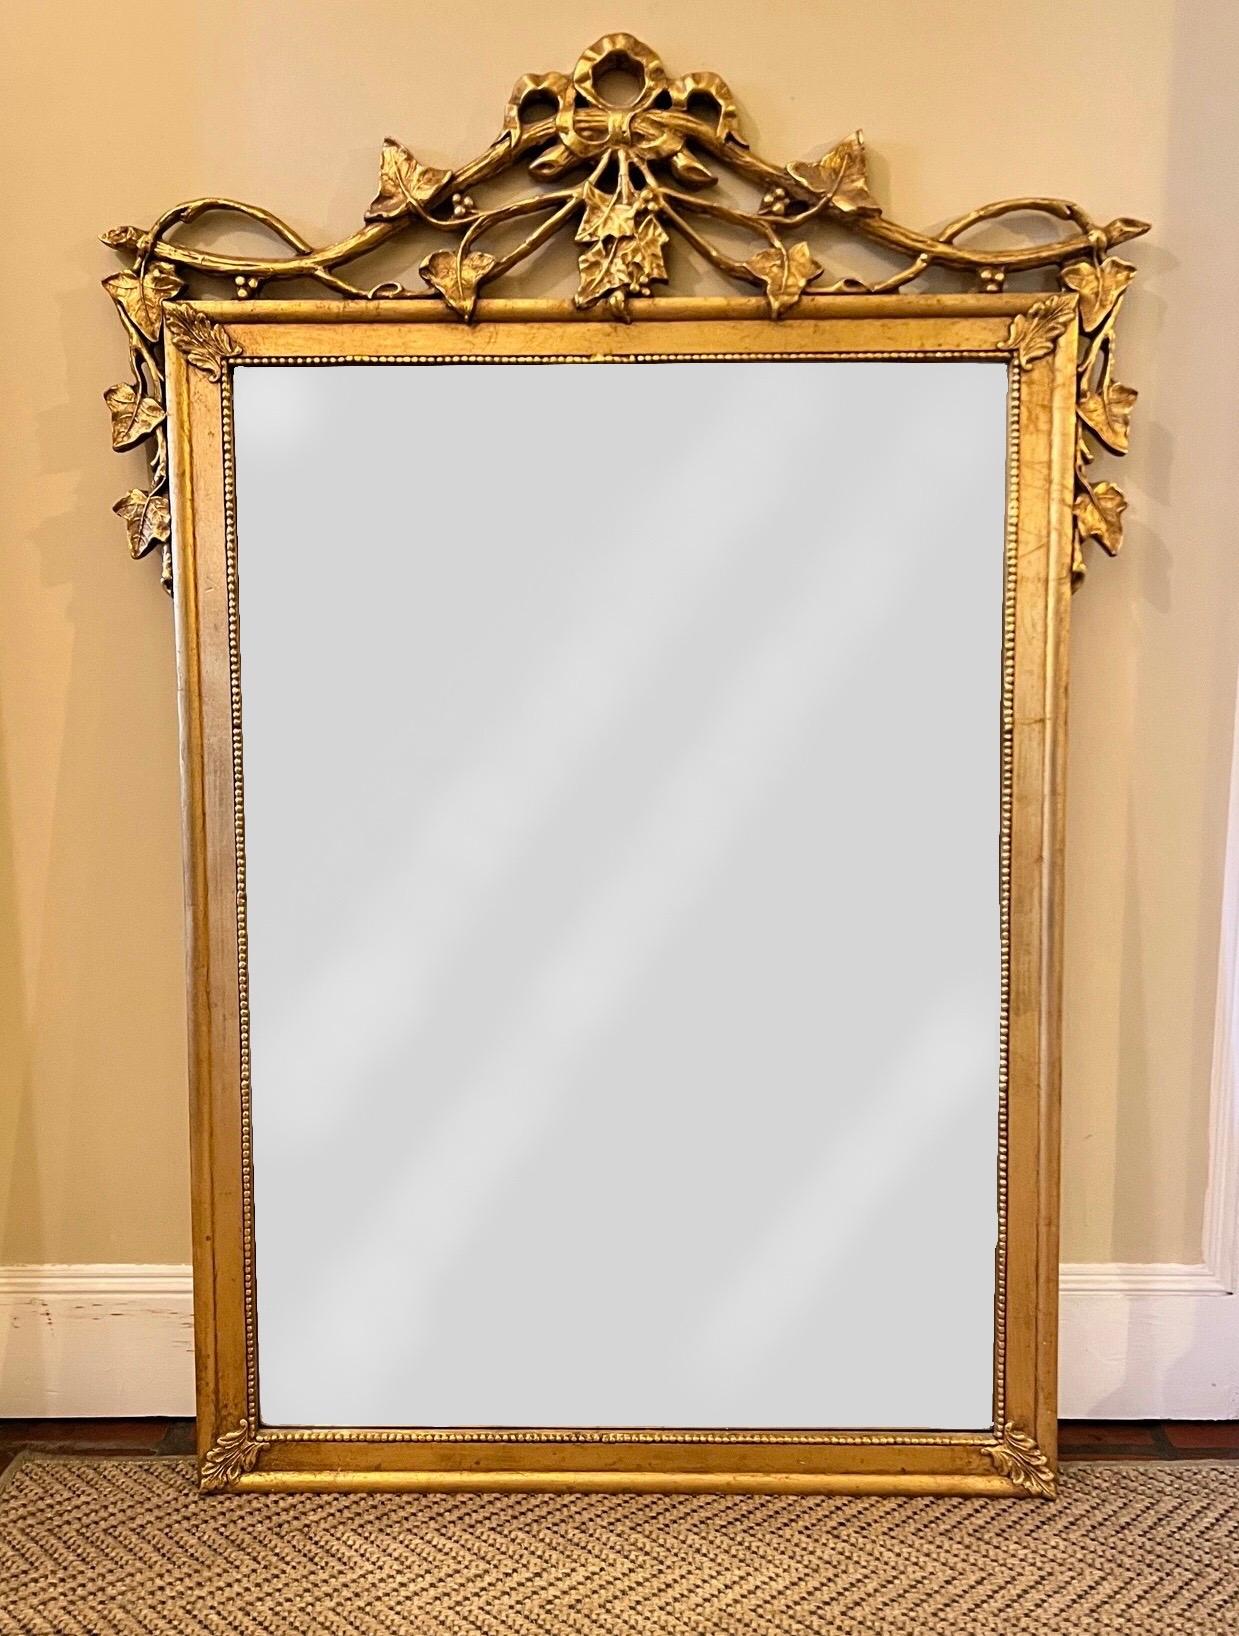 Friedman Brothers Late 18th C. Style Mirror - The Philippe #1496 5